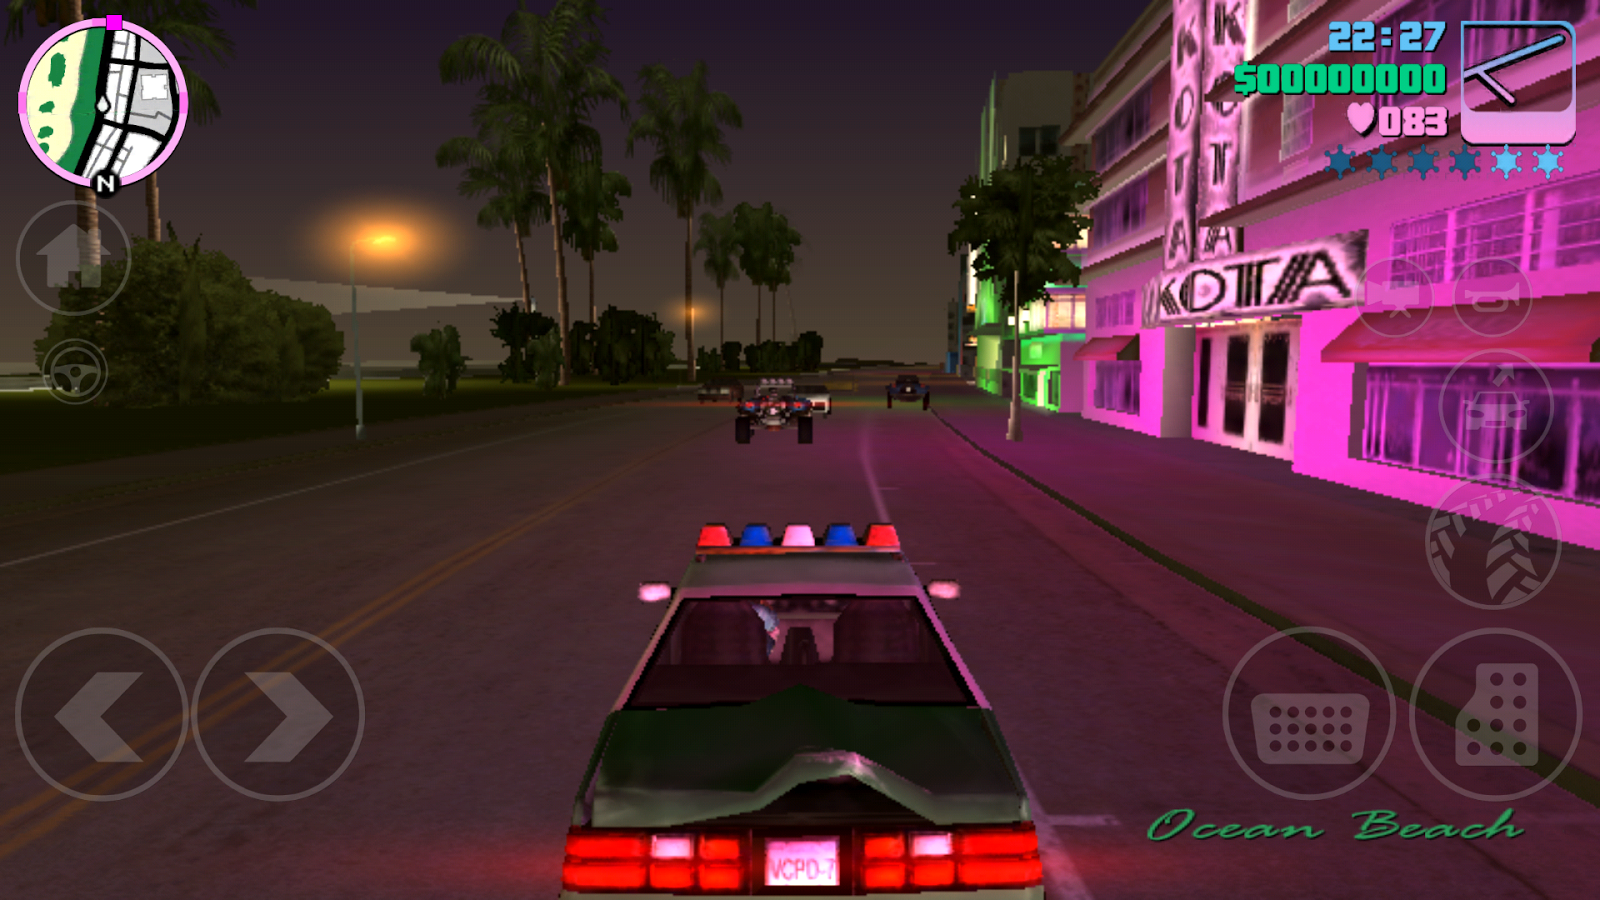 Gta vice city 2 free download for android